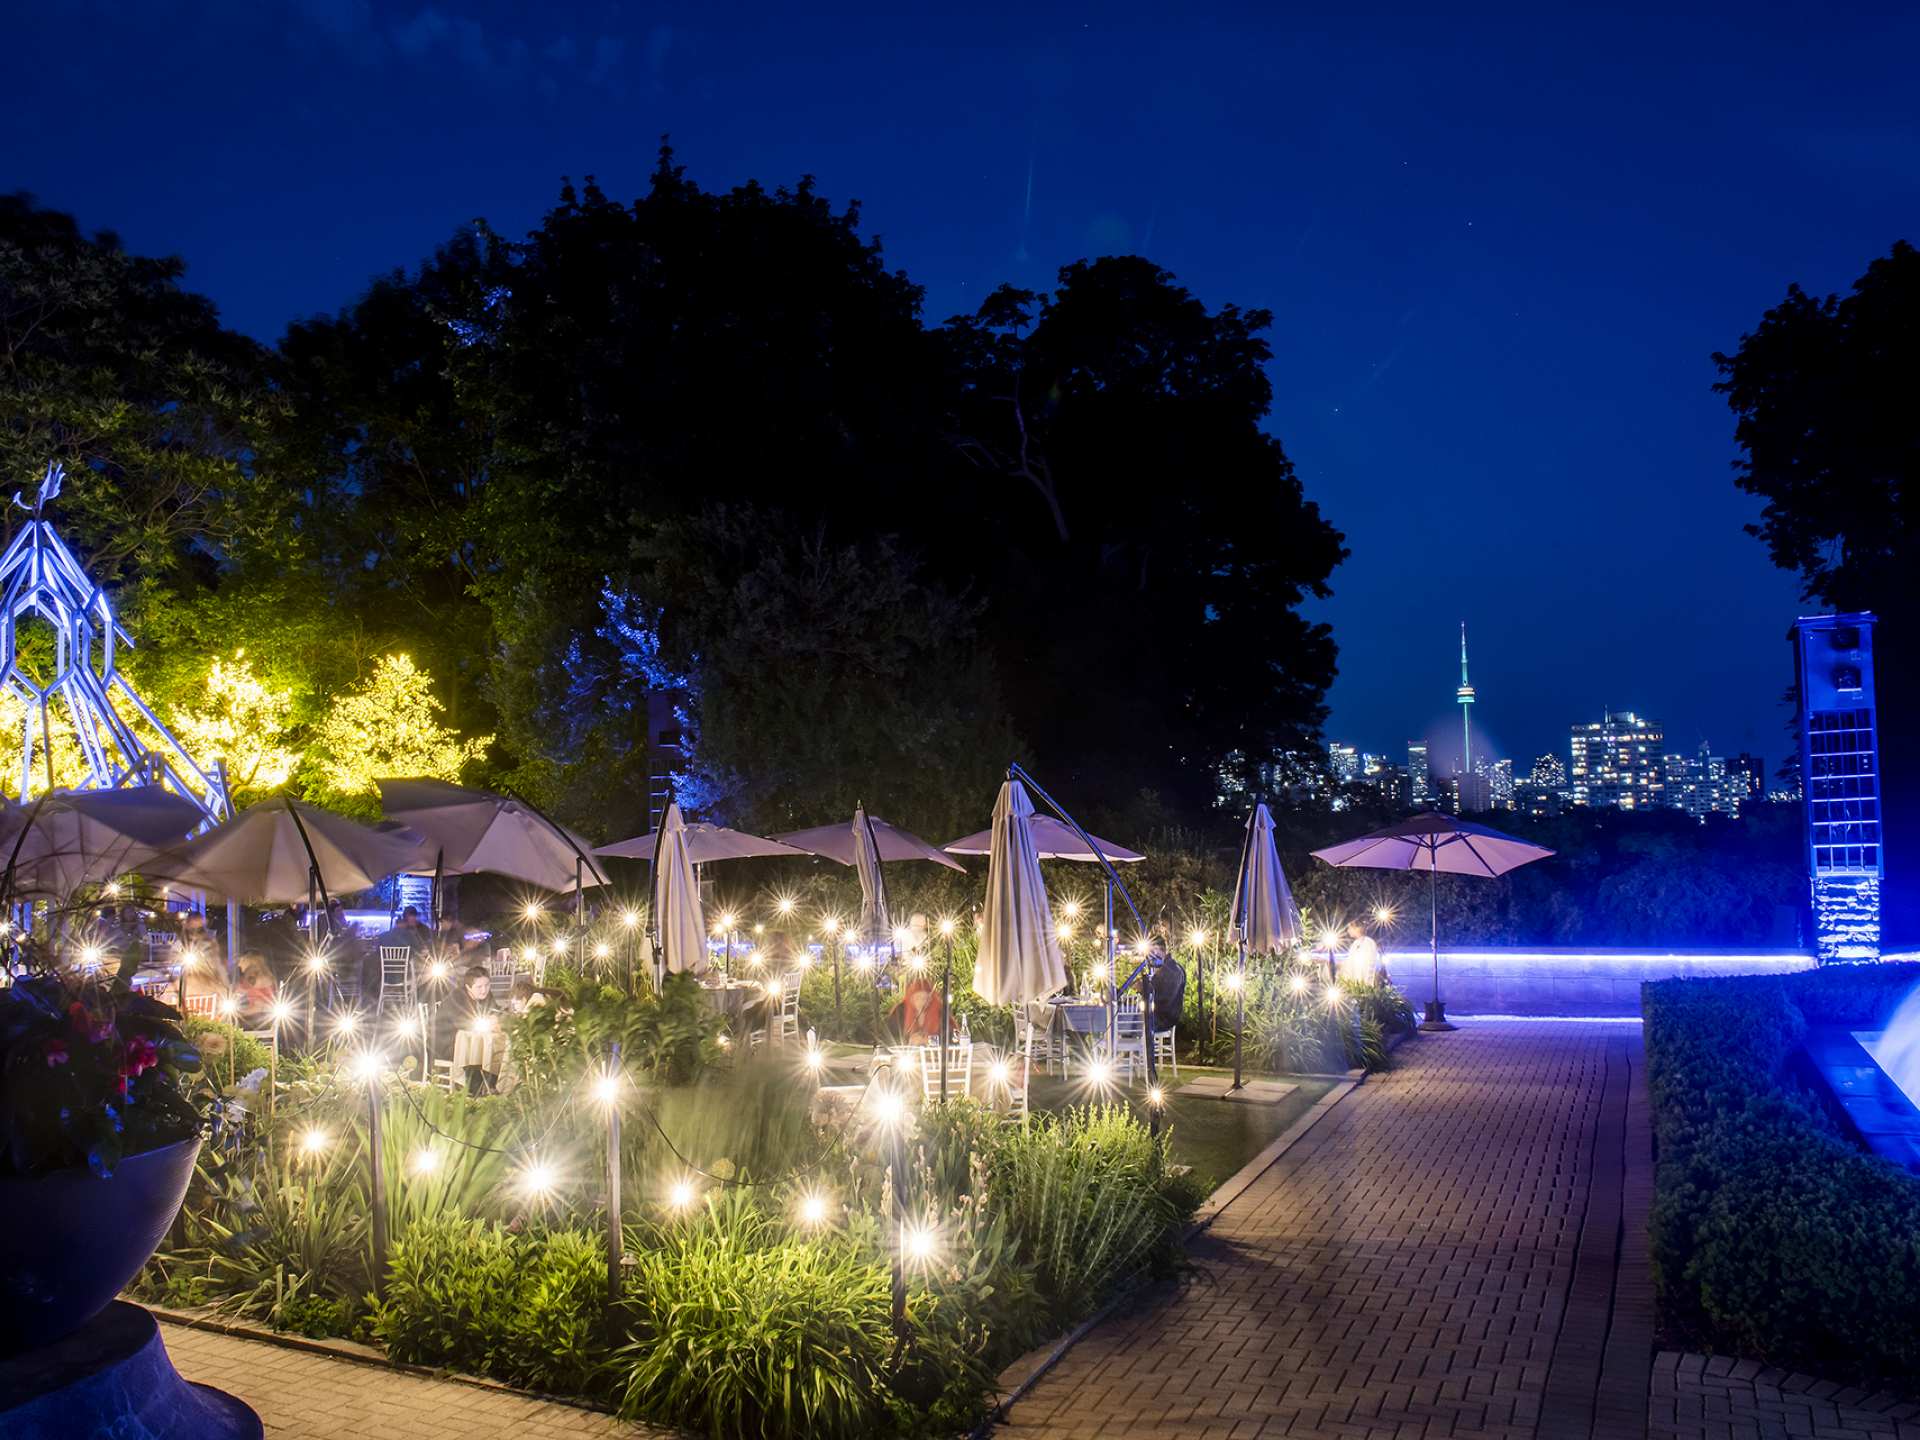 Best patios in Toronto | A view of Toronto from The Gardens at Casa Loma at night